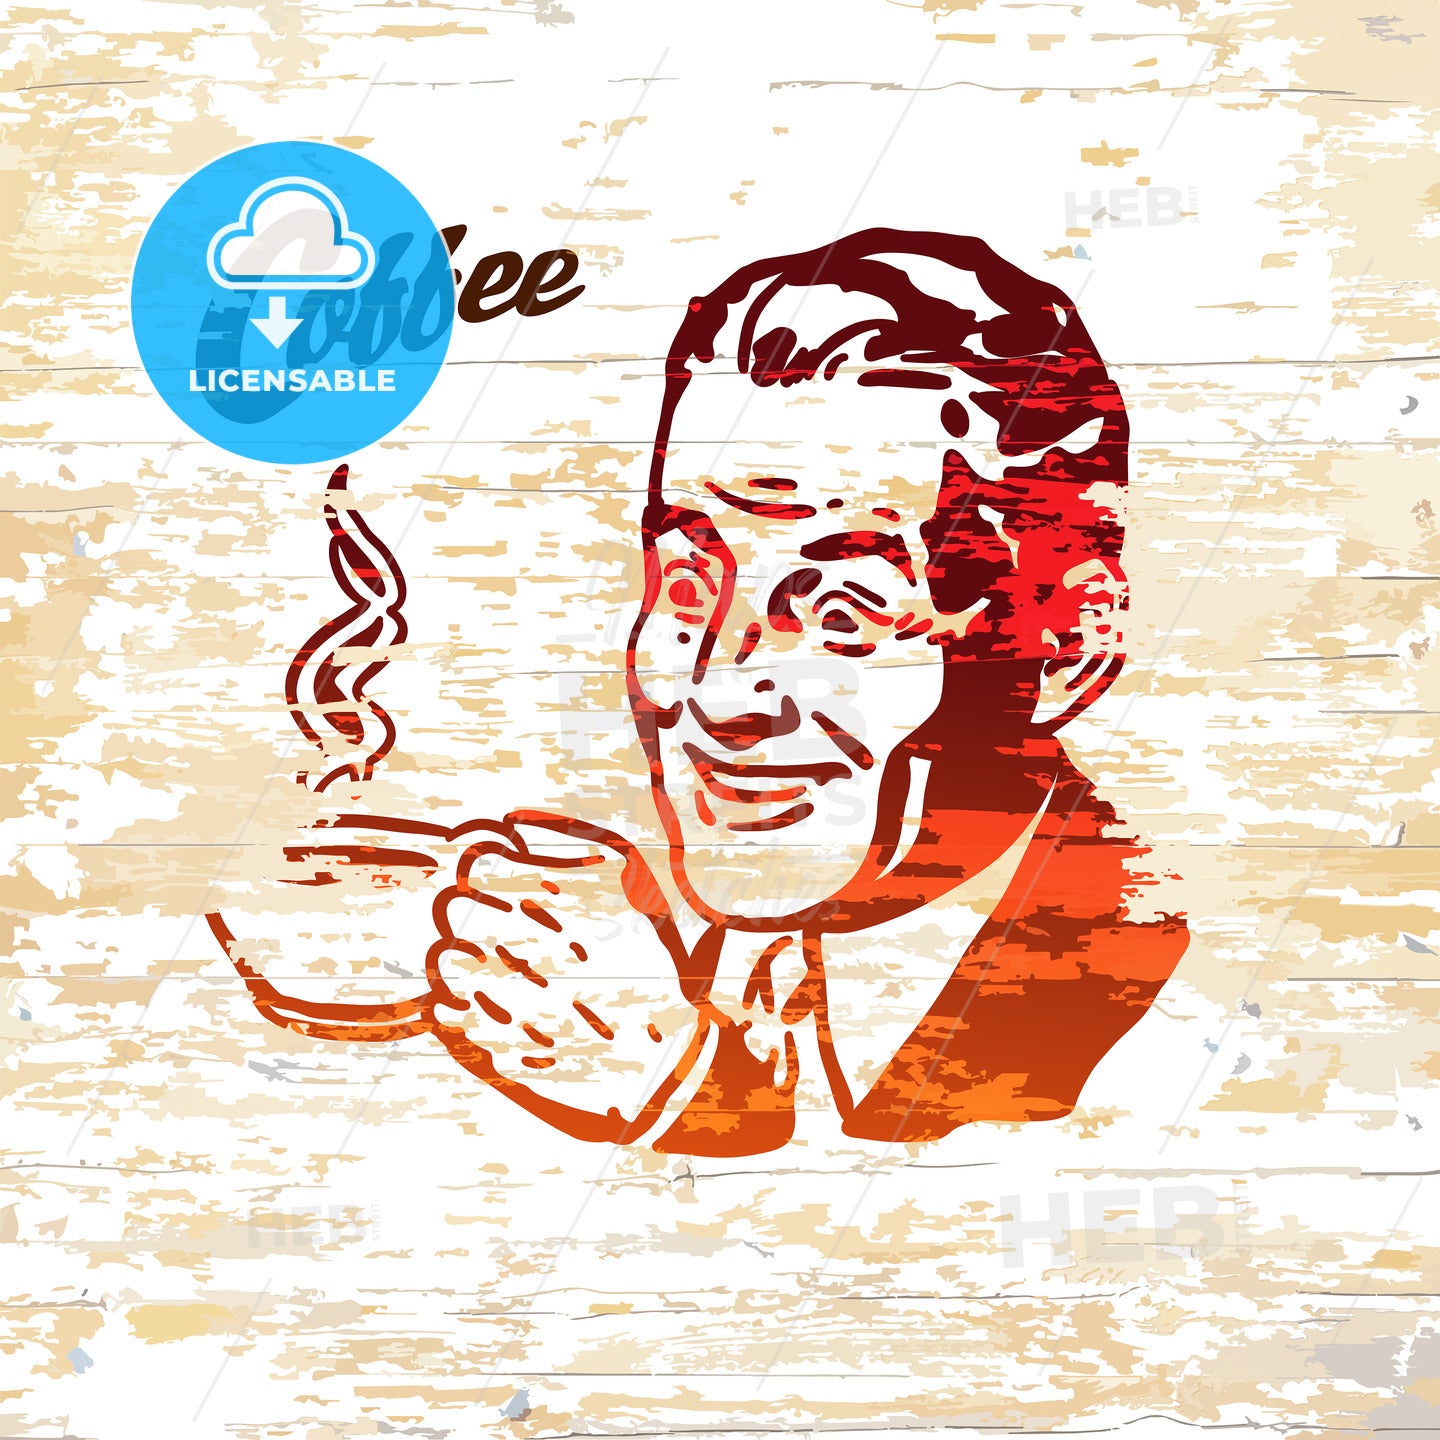 Vintage coffee men icon on wooden background – instant download